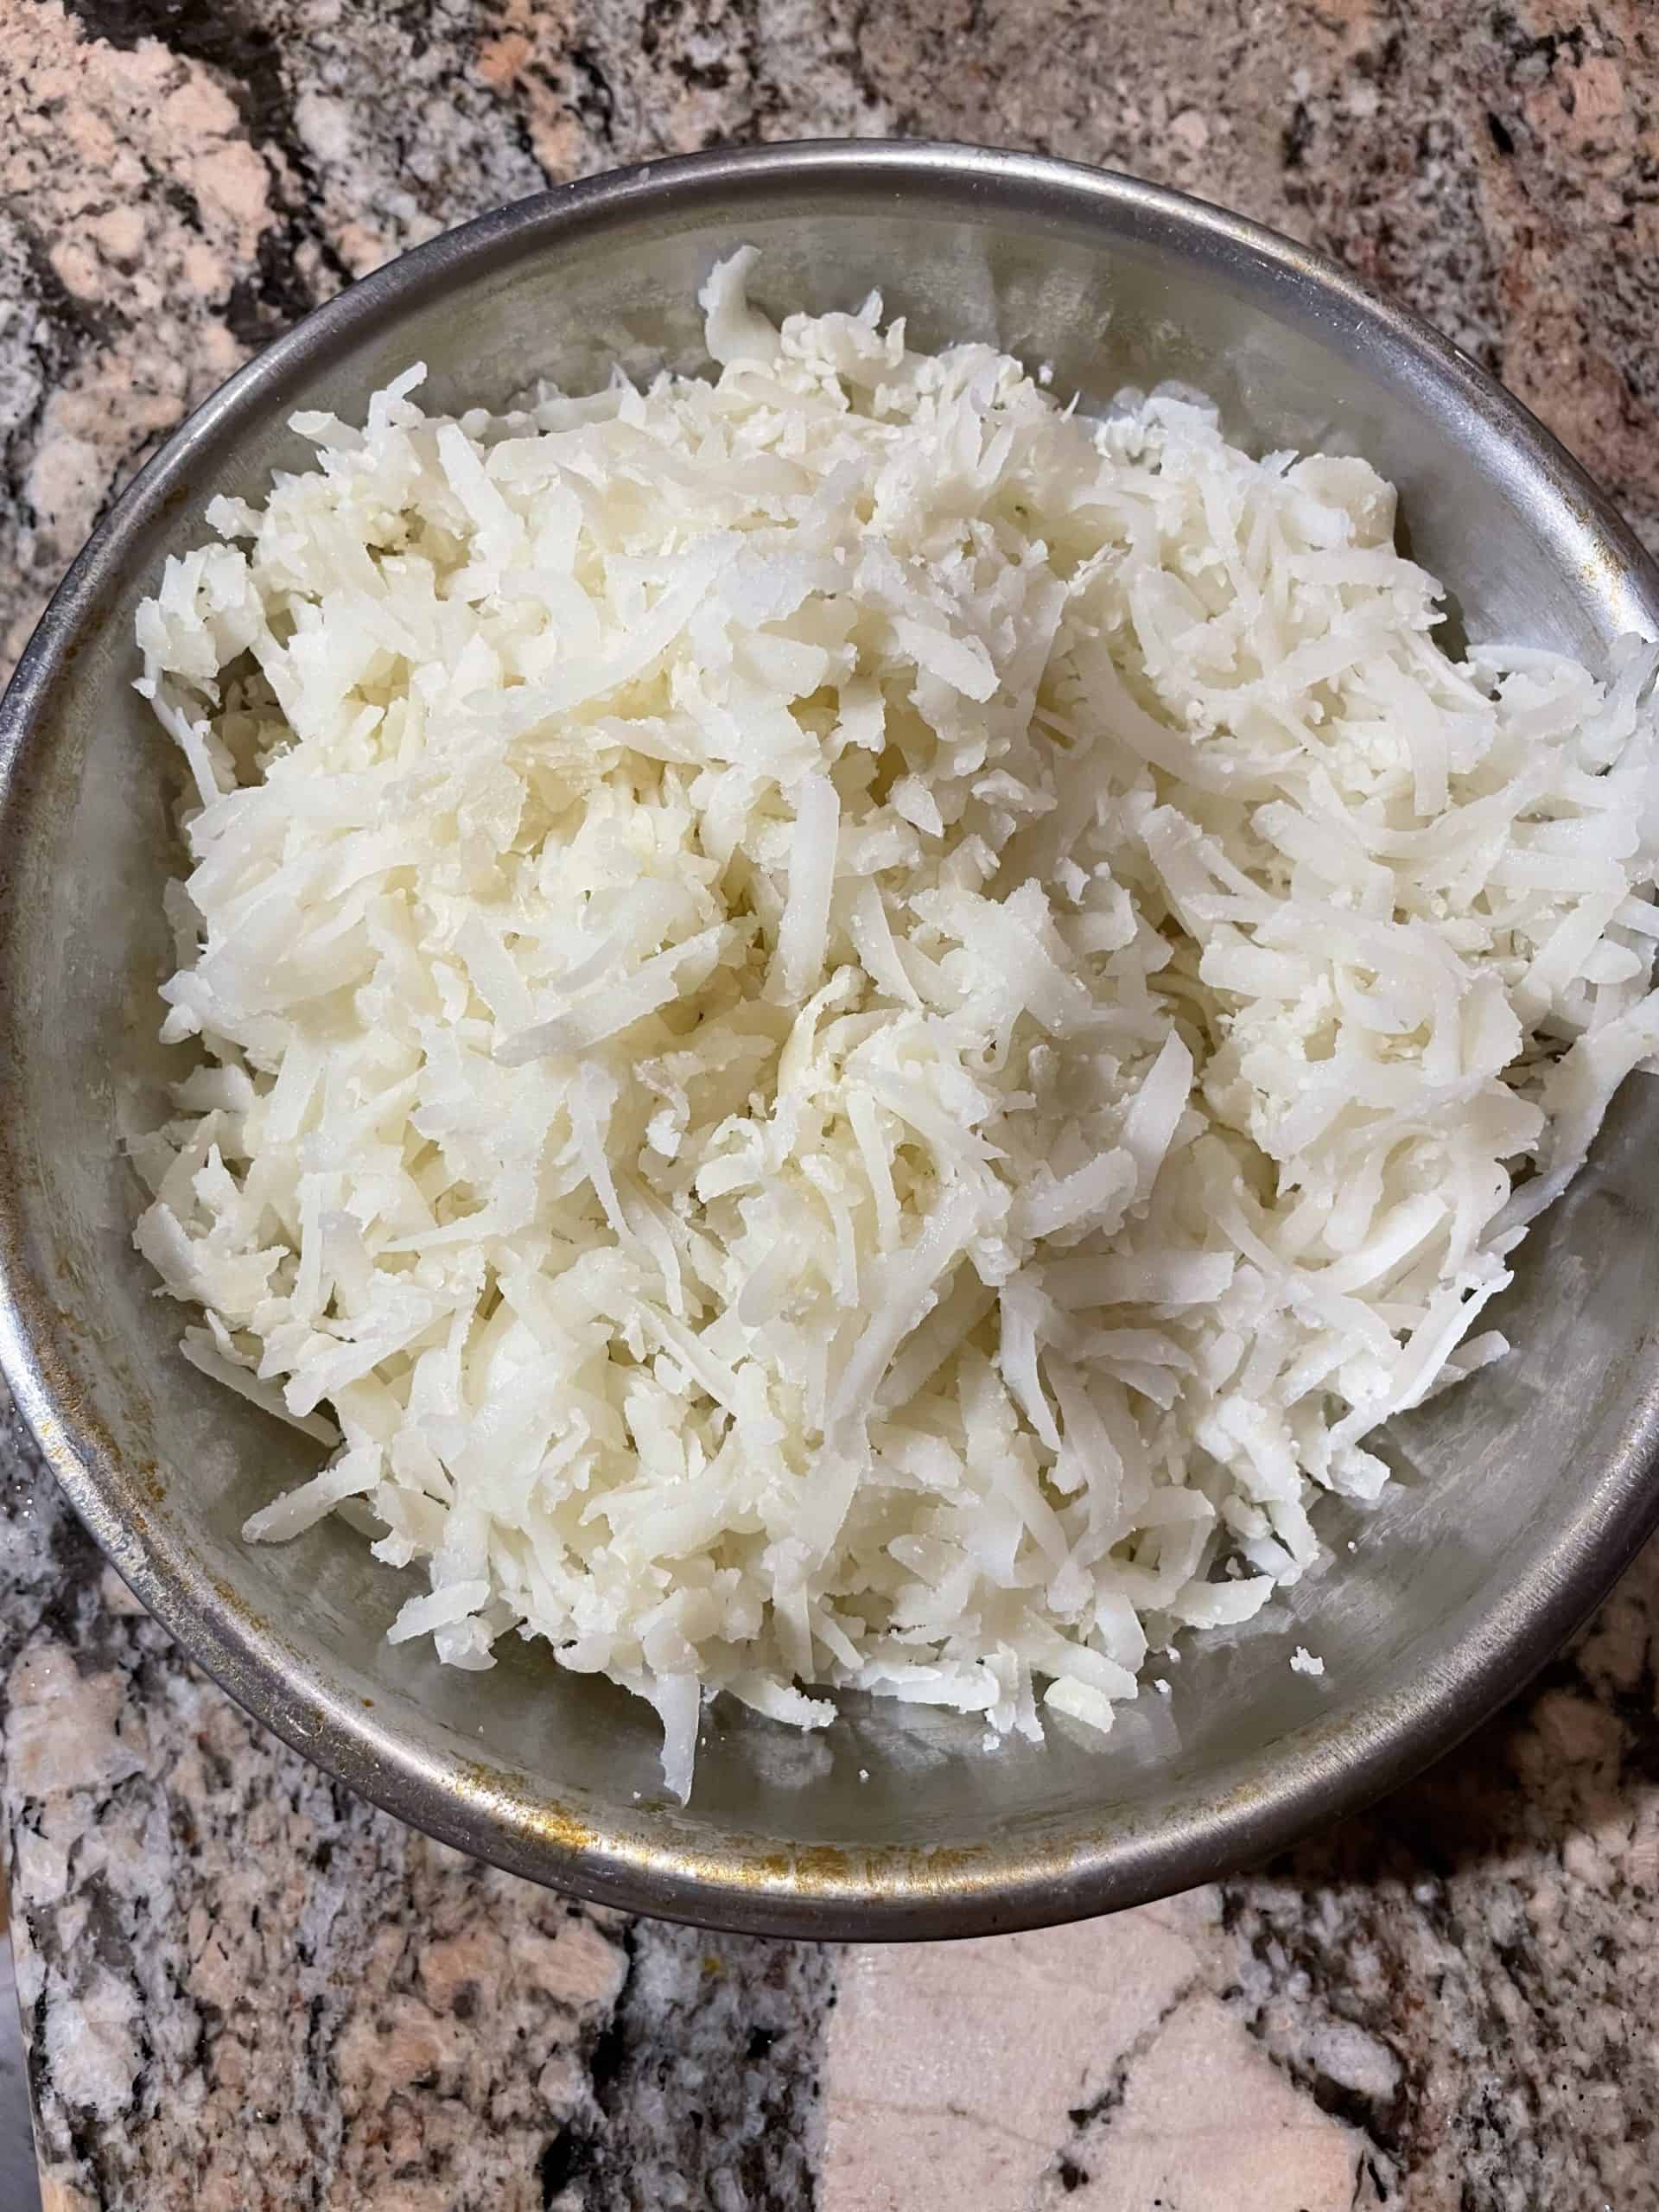 Shredded Potatoes in a Mixing Bowl.